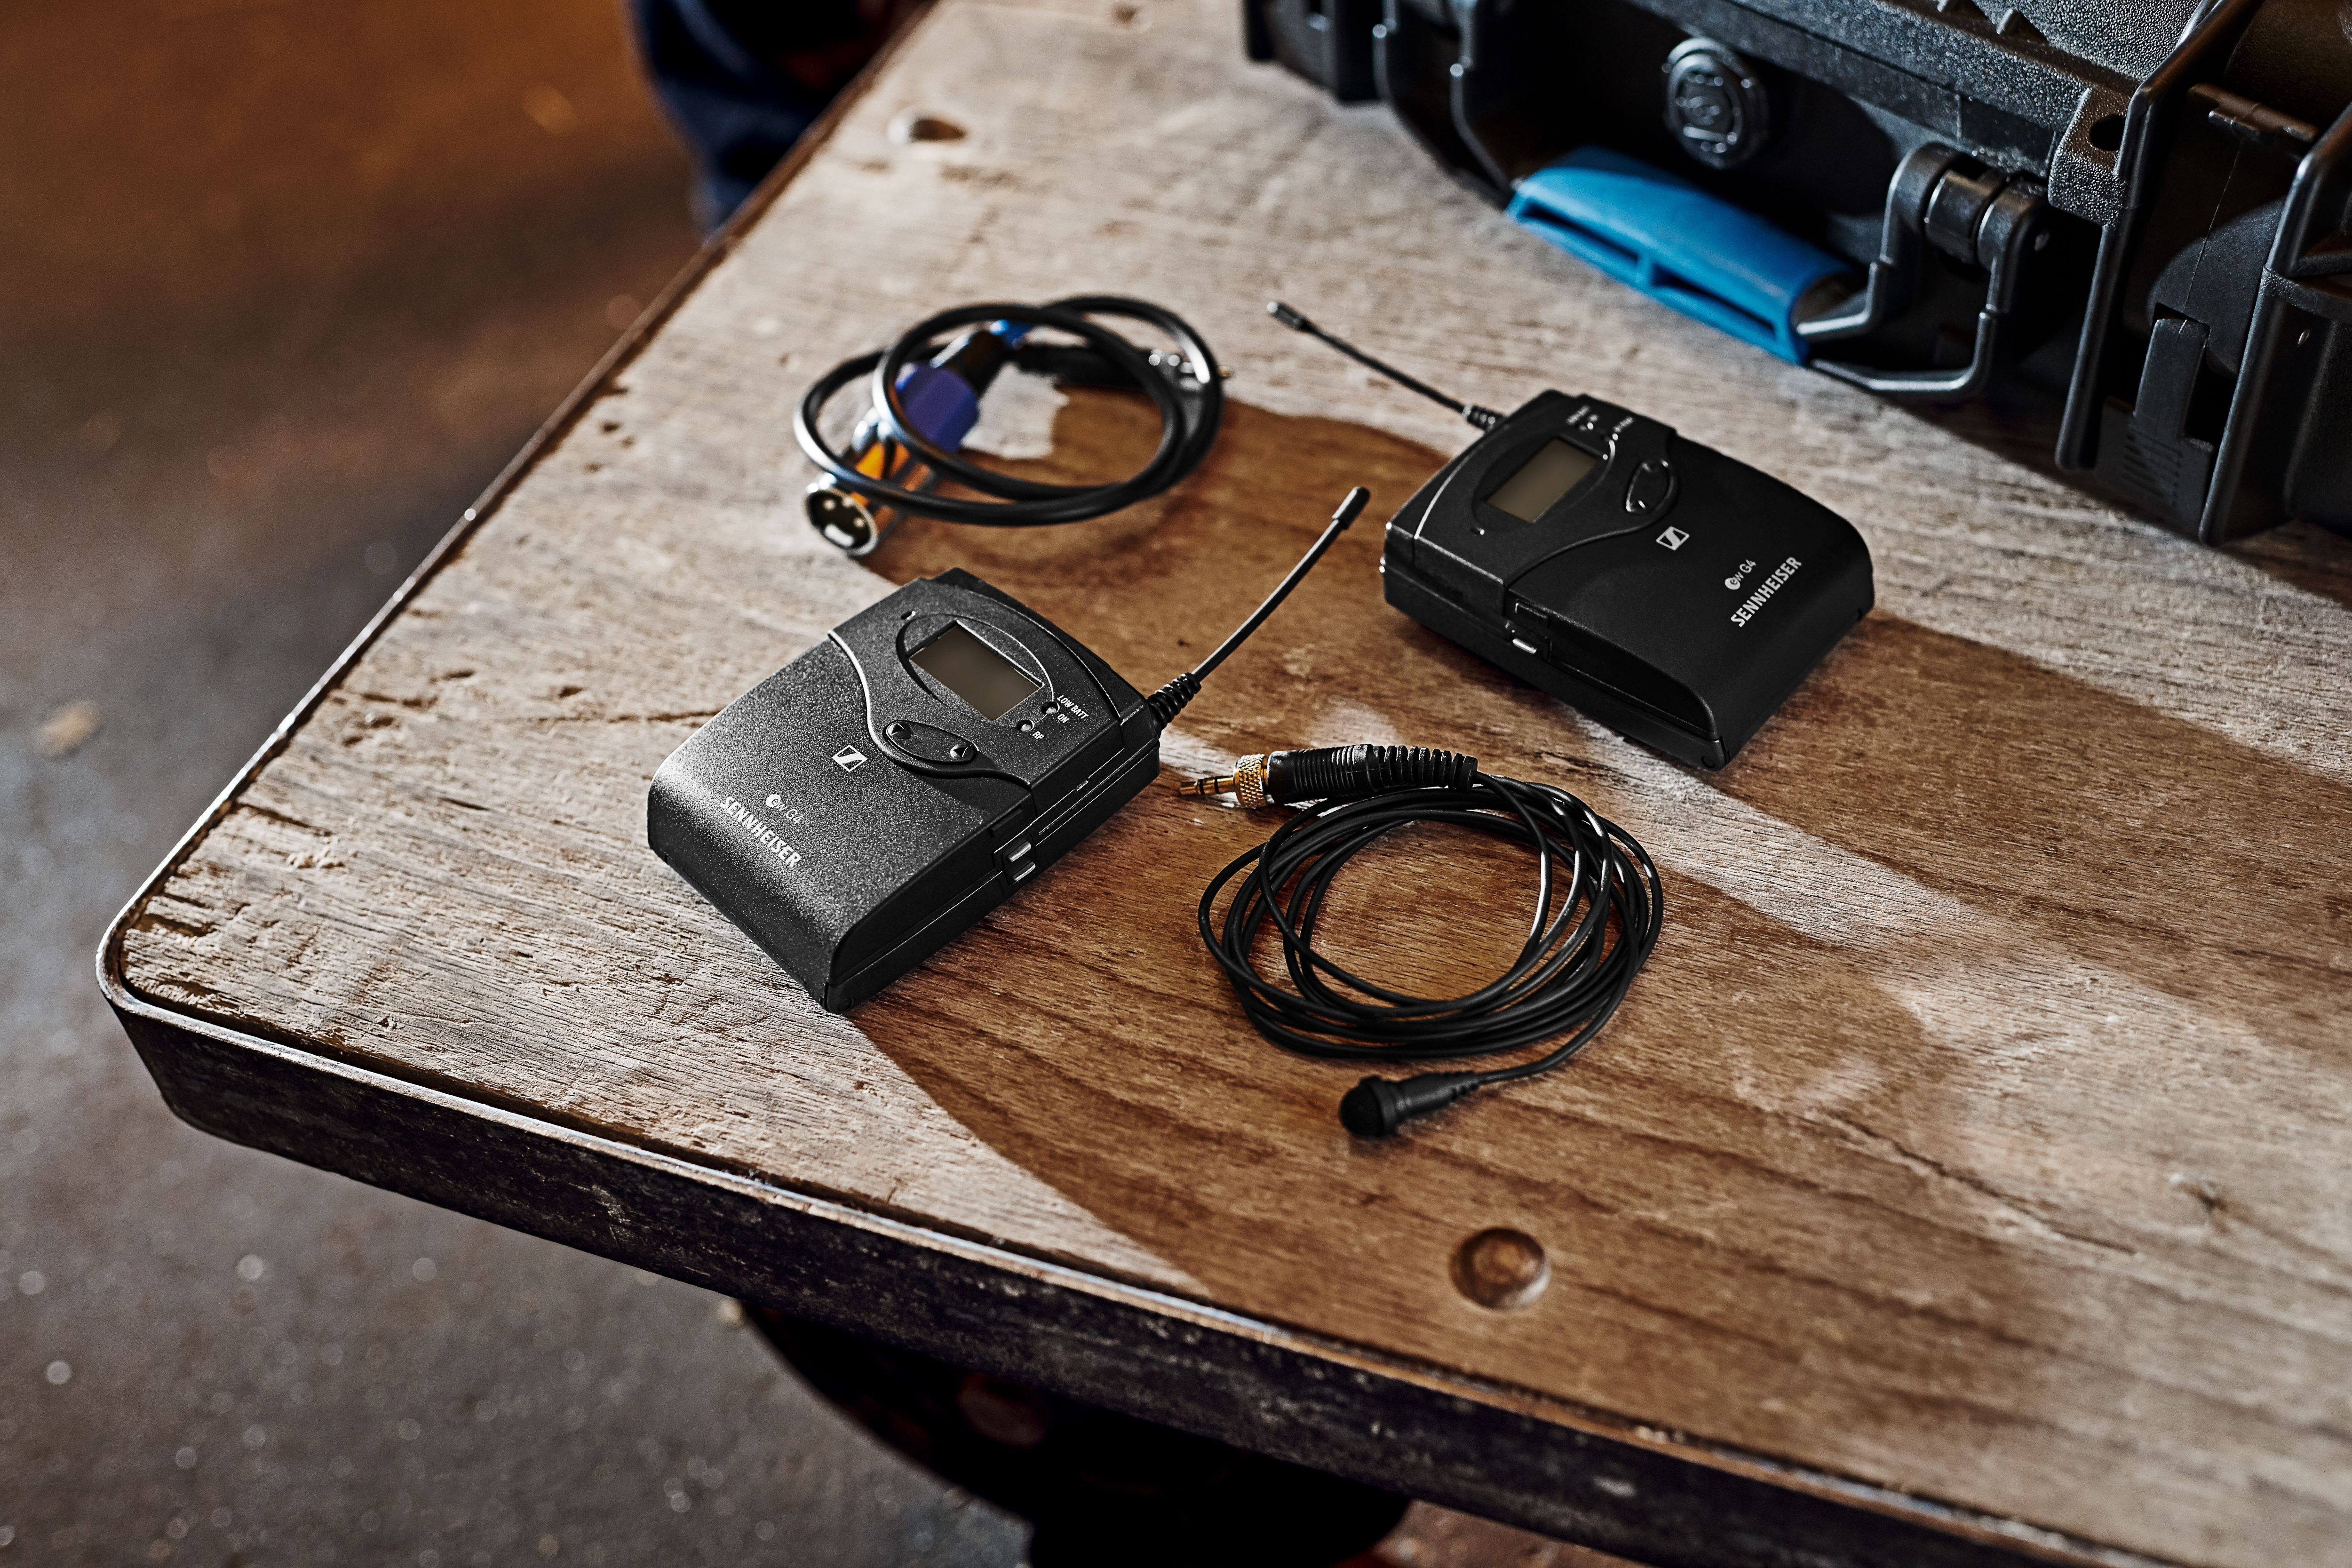 The evolution wireless camera sets are a firm favorite with mobile journalists